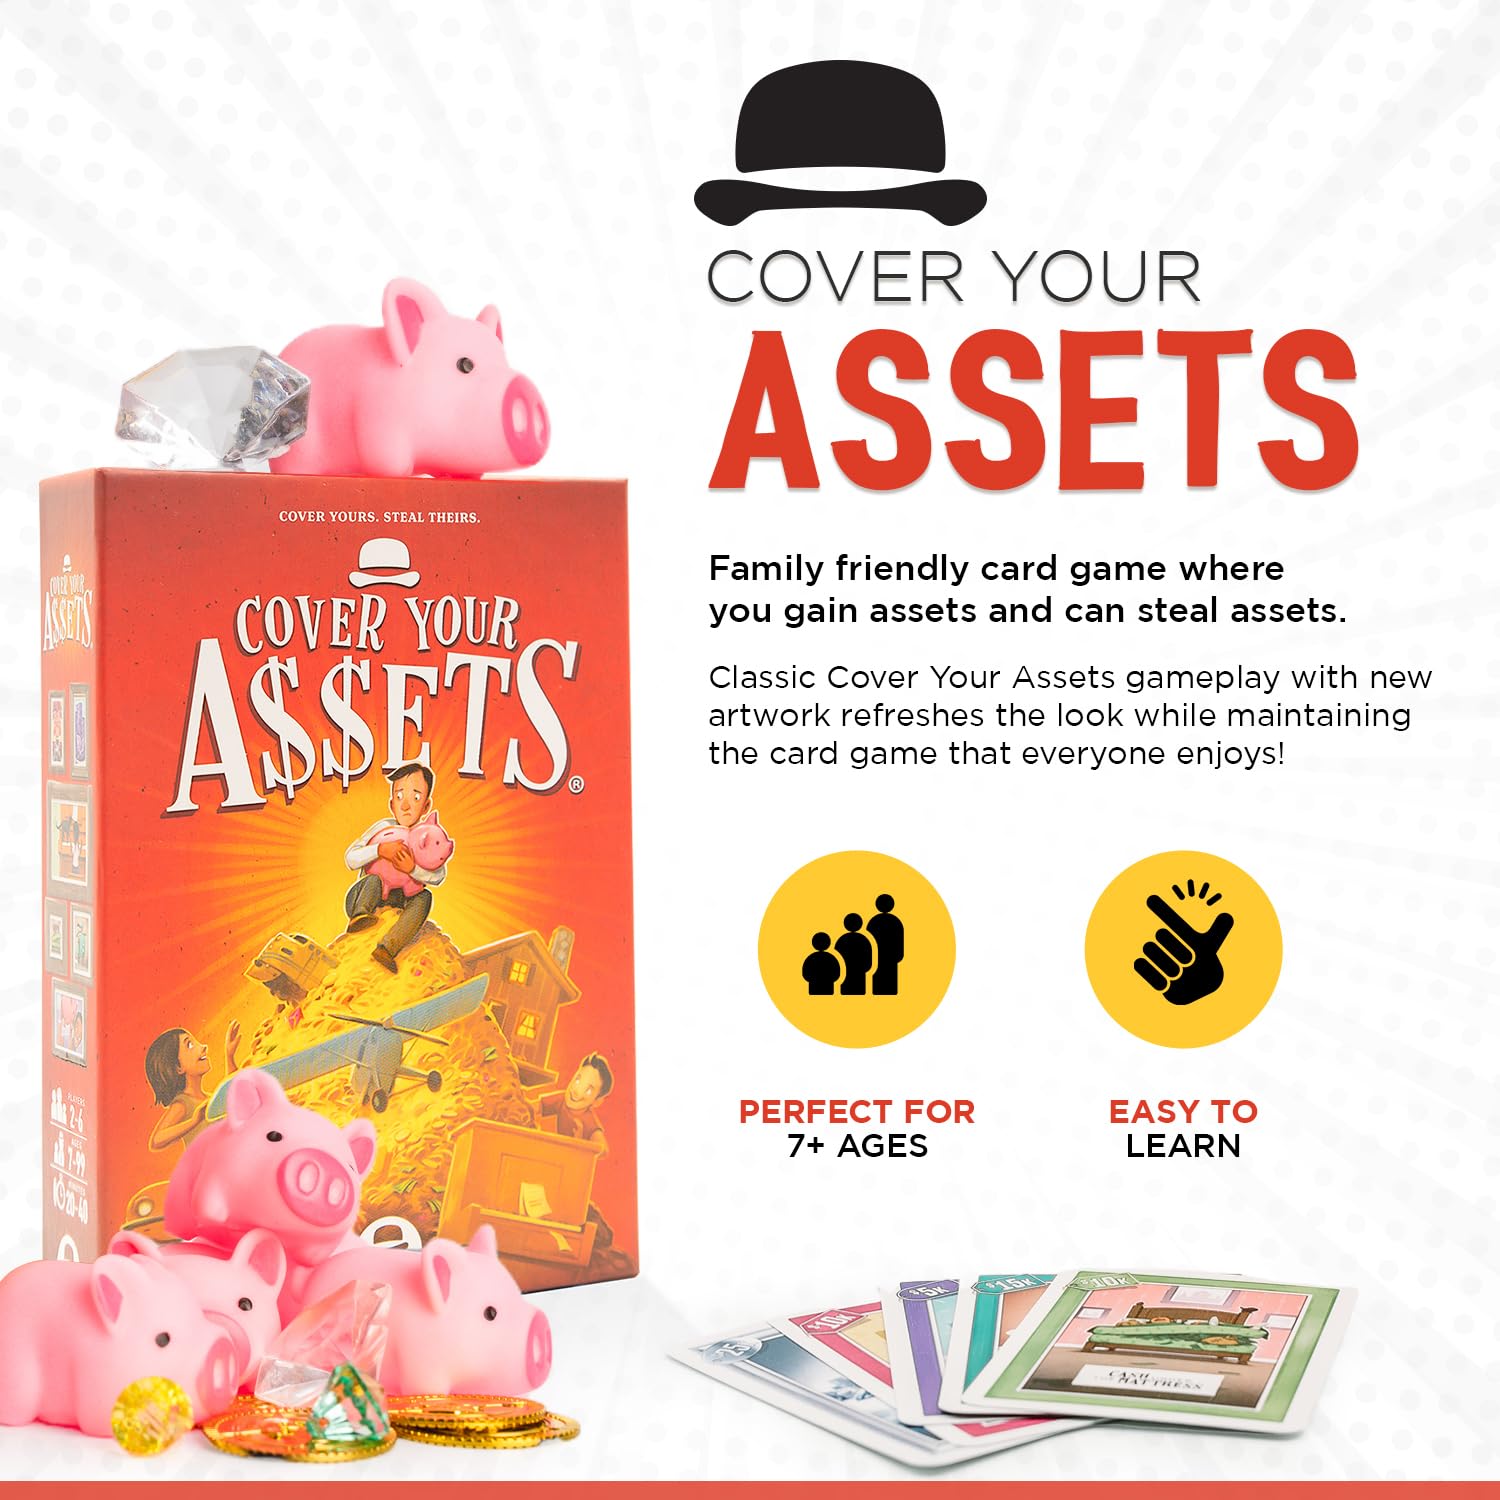 Grandpa Beck's Games Cover Your Assets | from The Creators of Skull King | Easy to Learn and Outrageously Fun for Kids, Teens, & Adults Alike | 2-6 Players Ages 7+